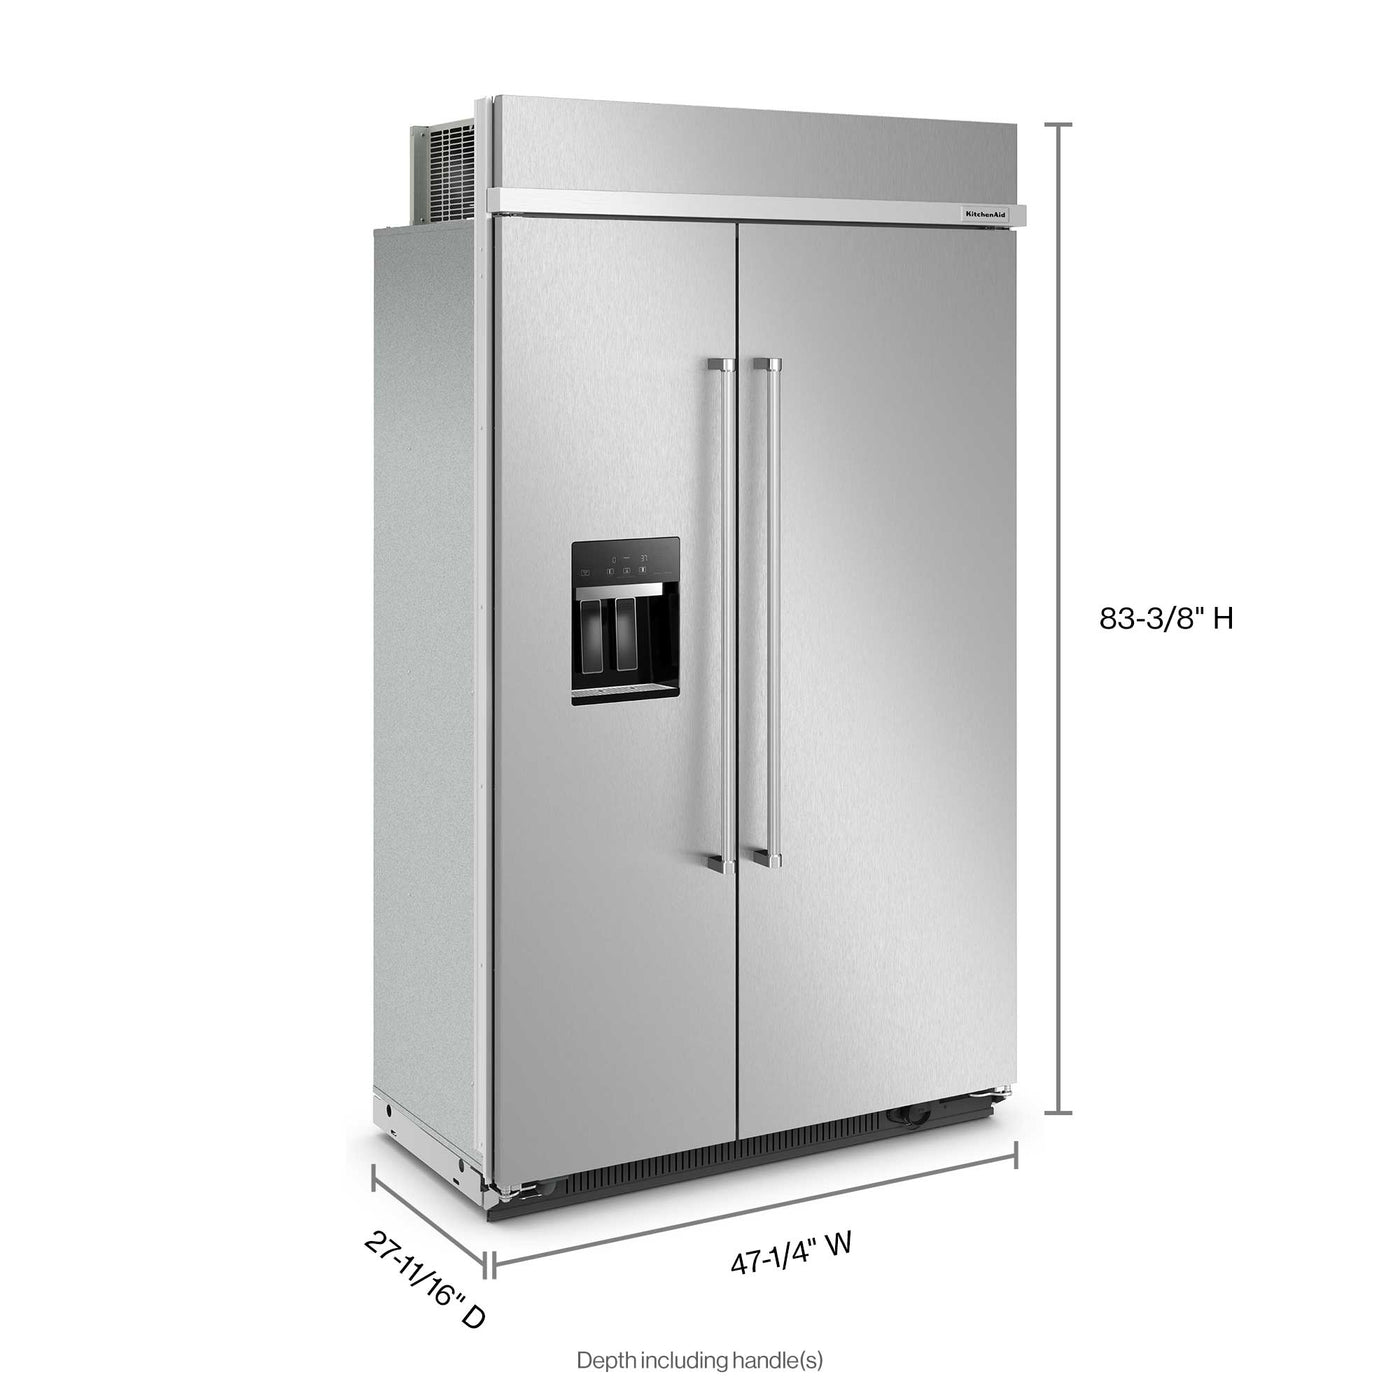 KitchenAid Stainless Steel 48" Built-In Side-by-Side Refrigerator (29.4 cu. ft.) - KBSD708MSS